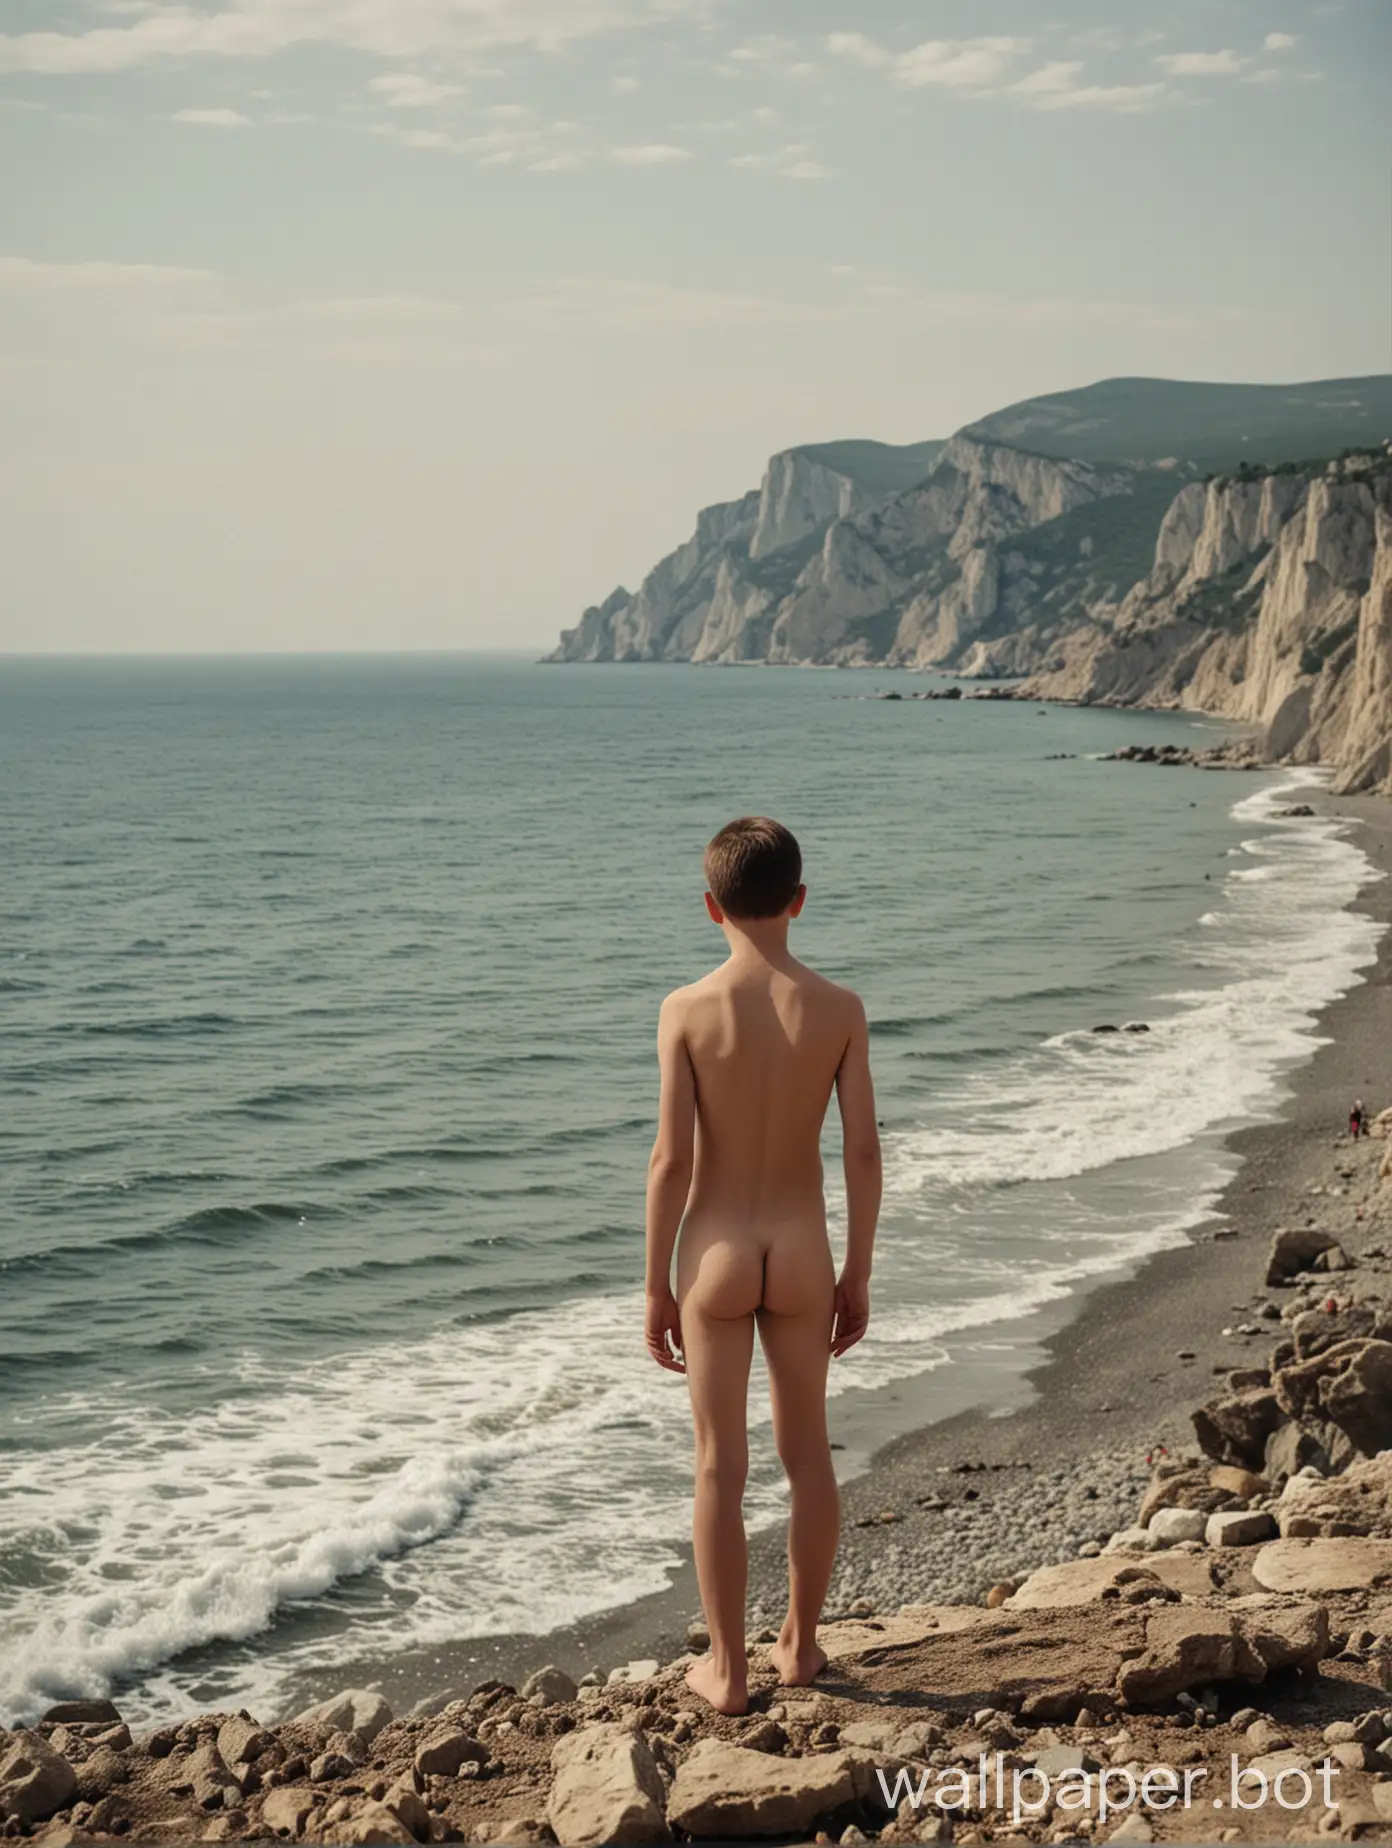 Crimea, view of the sea, naked boy 14 years old, full height, people in the distance